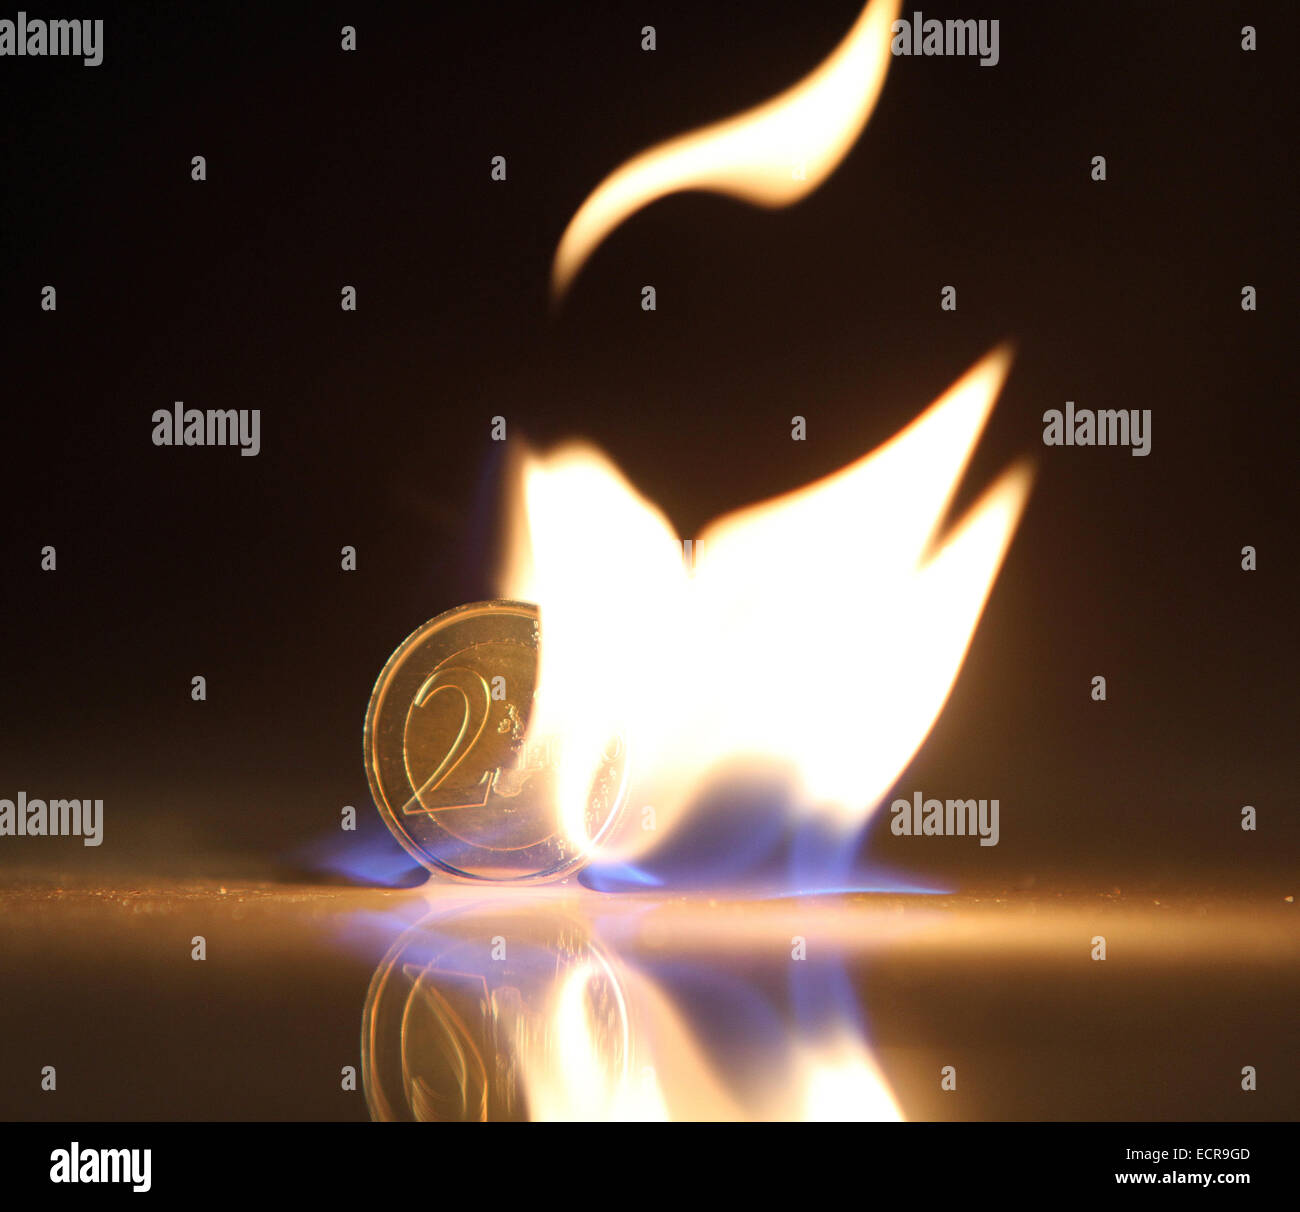 Euro coin in SWANLIKE flames, Stock Photo